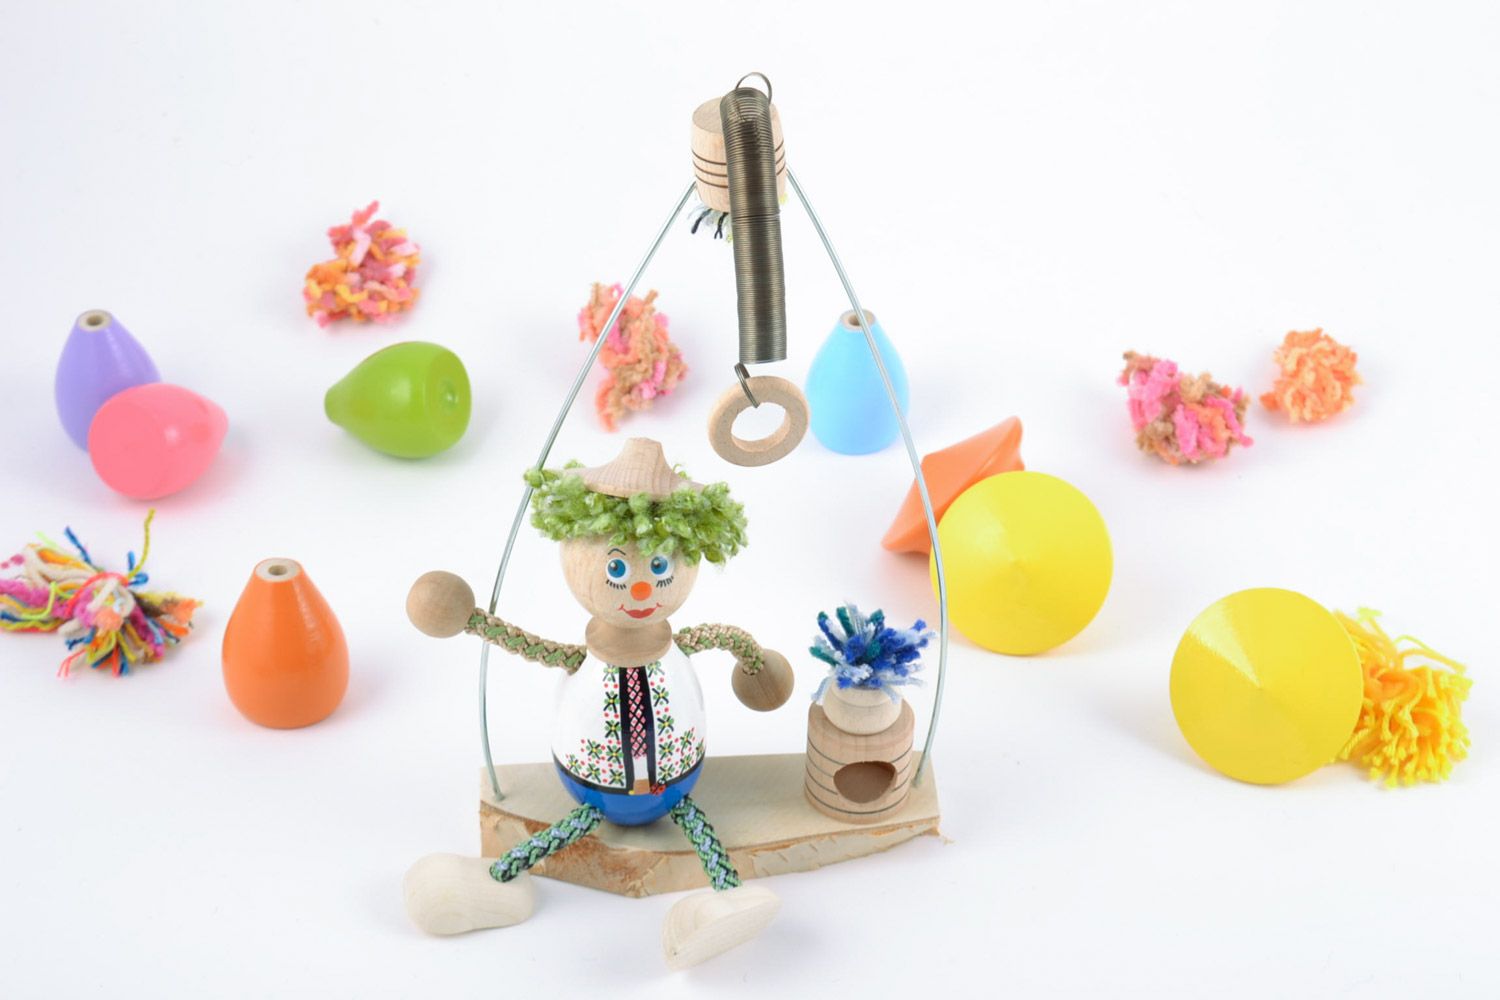 Homemade painted wooden eco toy in the shape of boy on swing for children photo 1